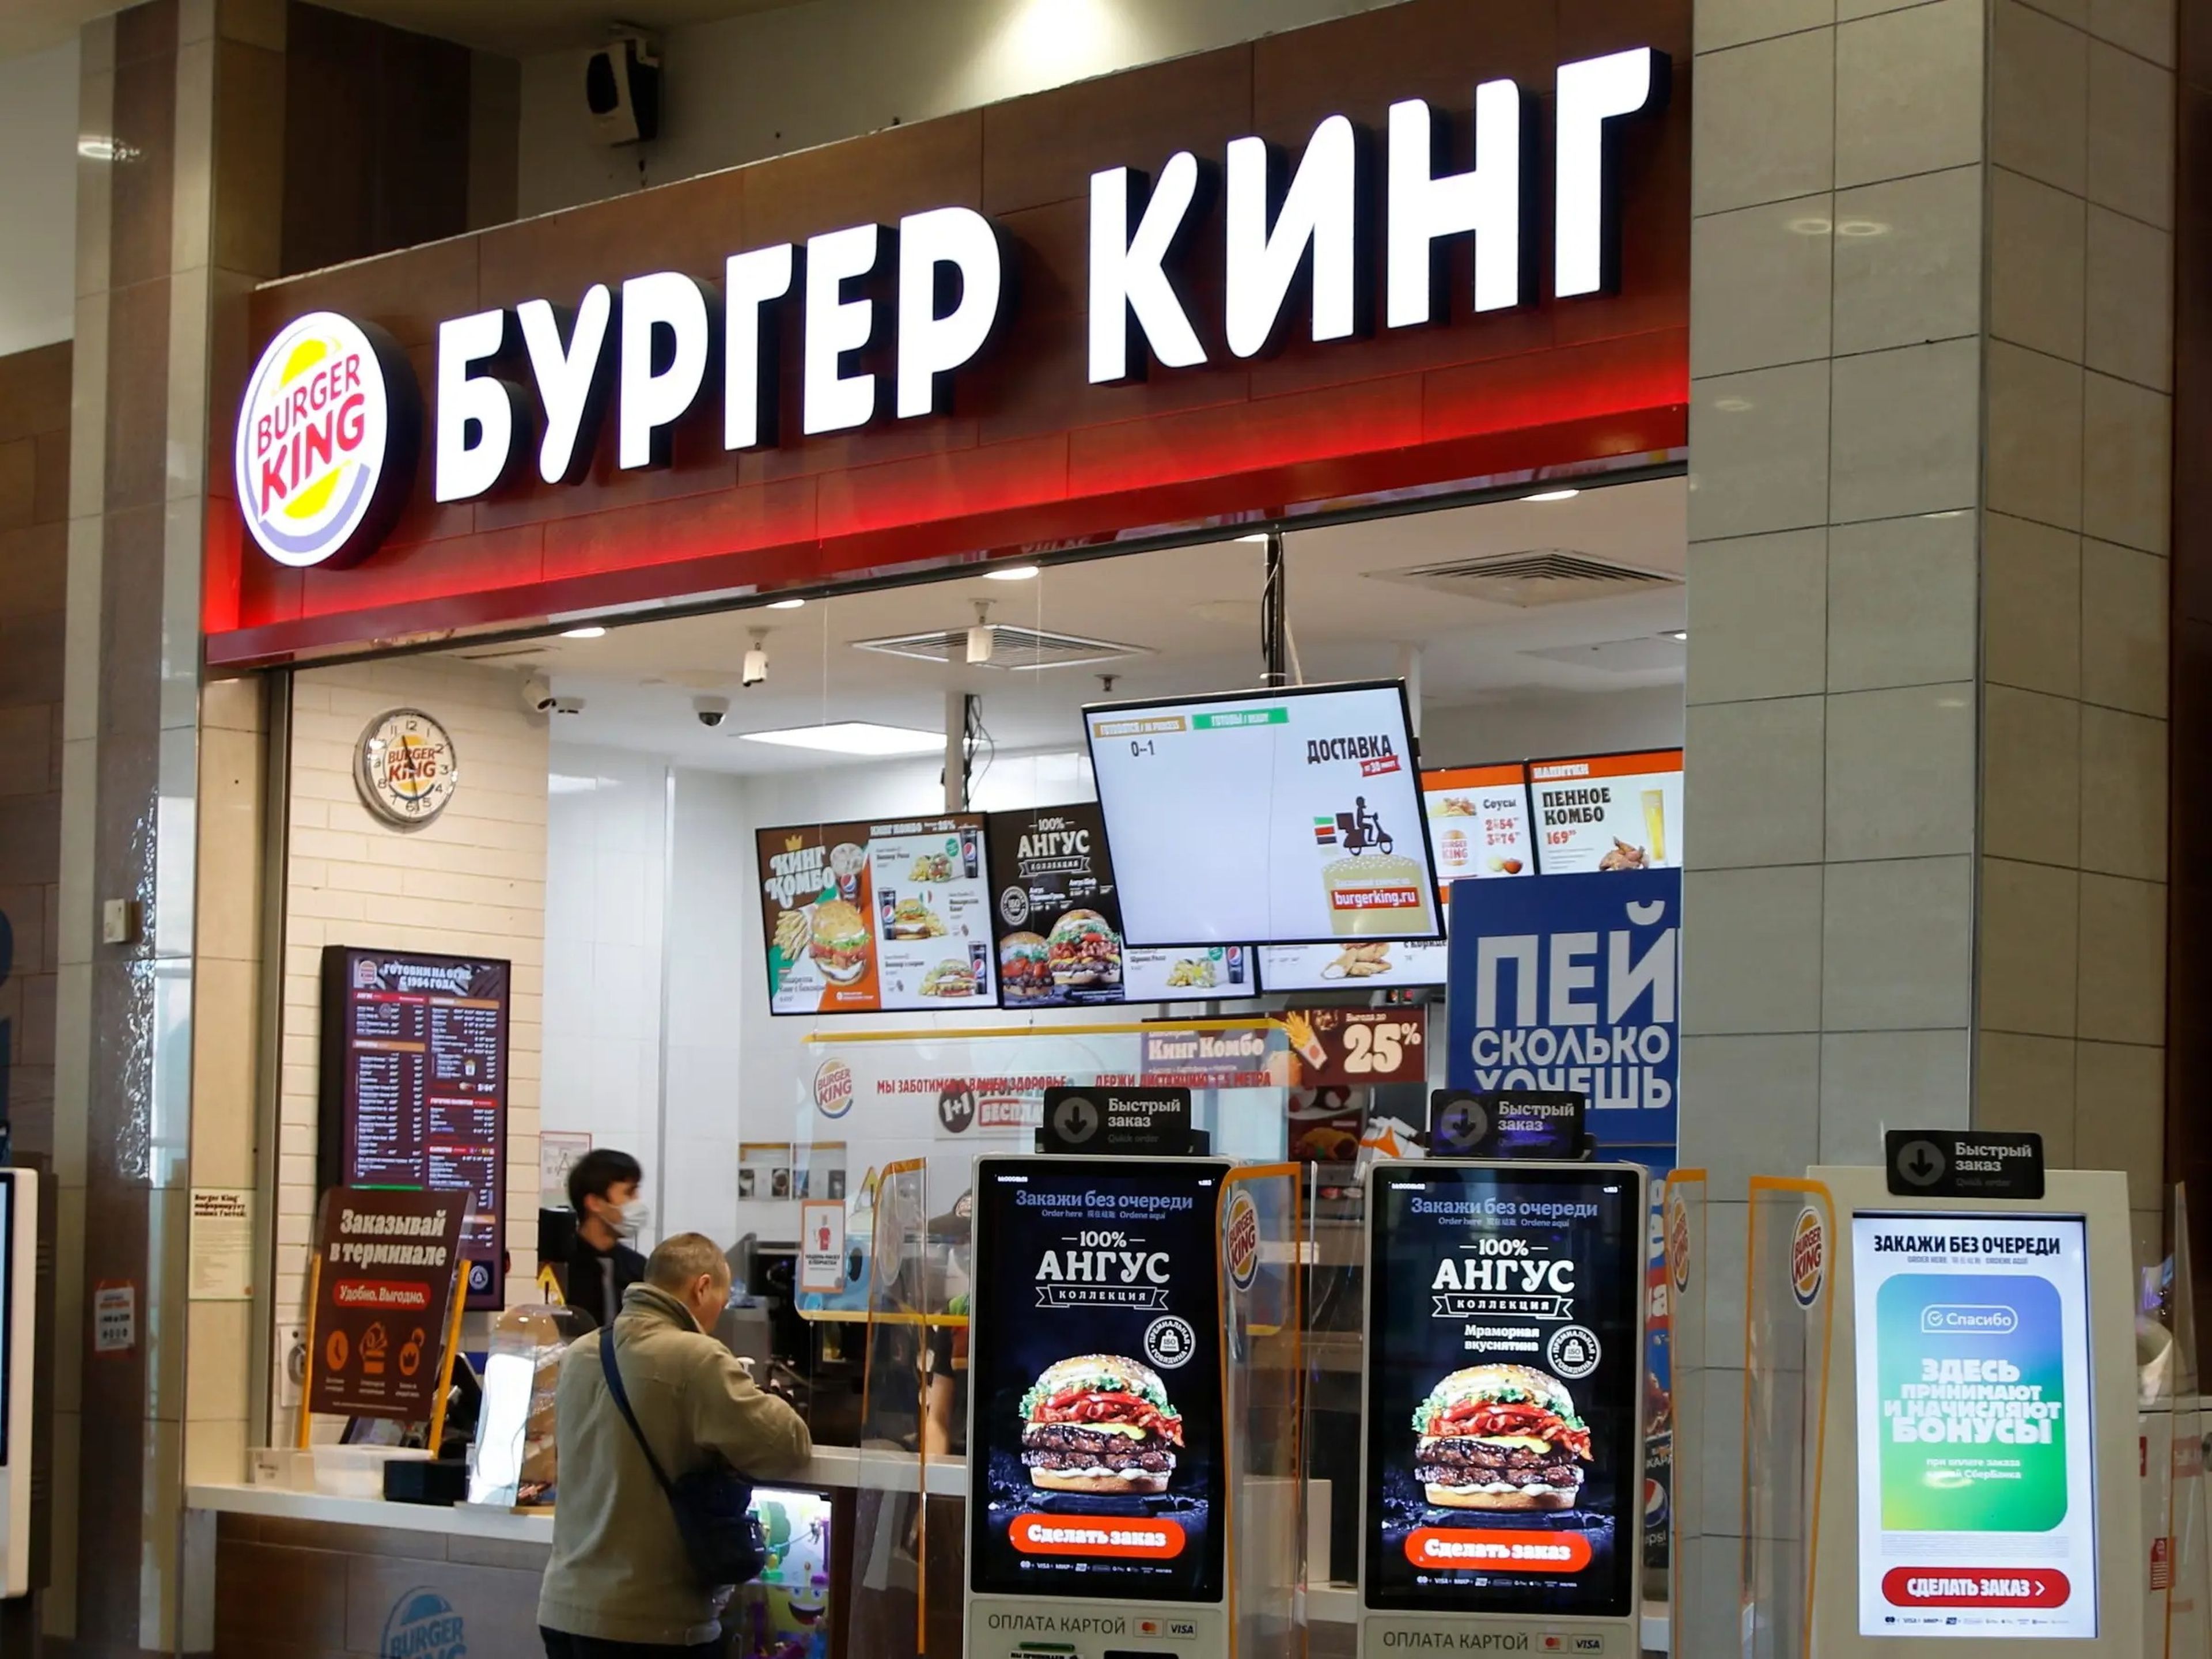 A Burger King store in St. Petersburg, Russia.